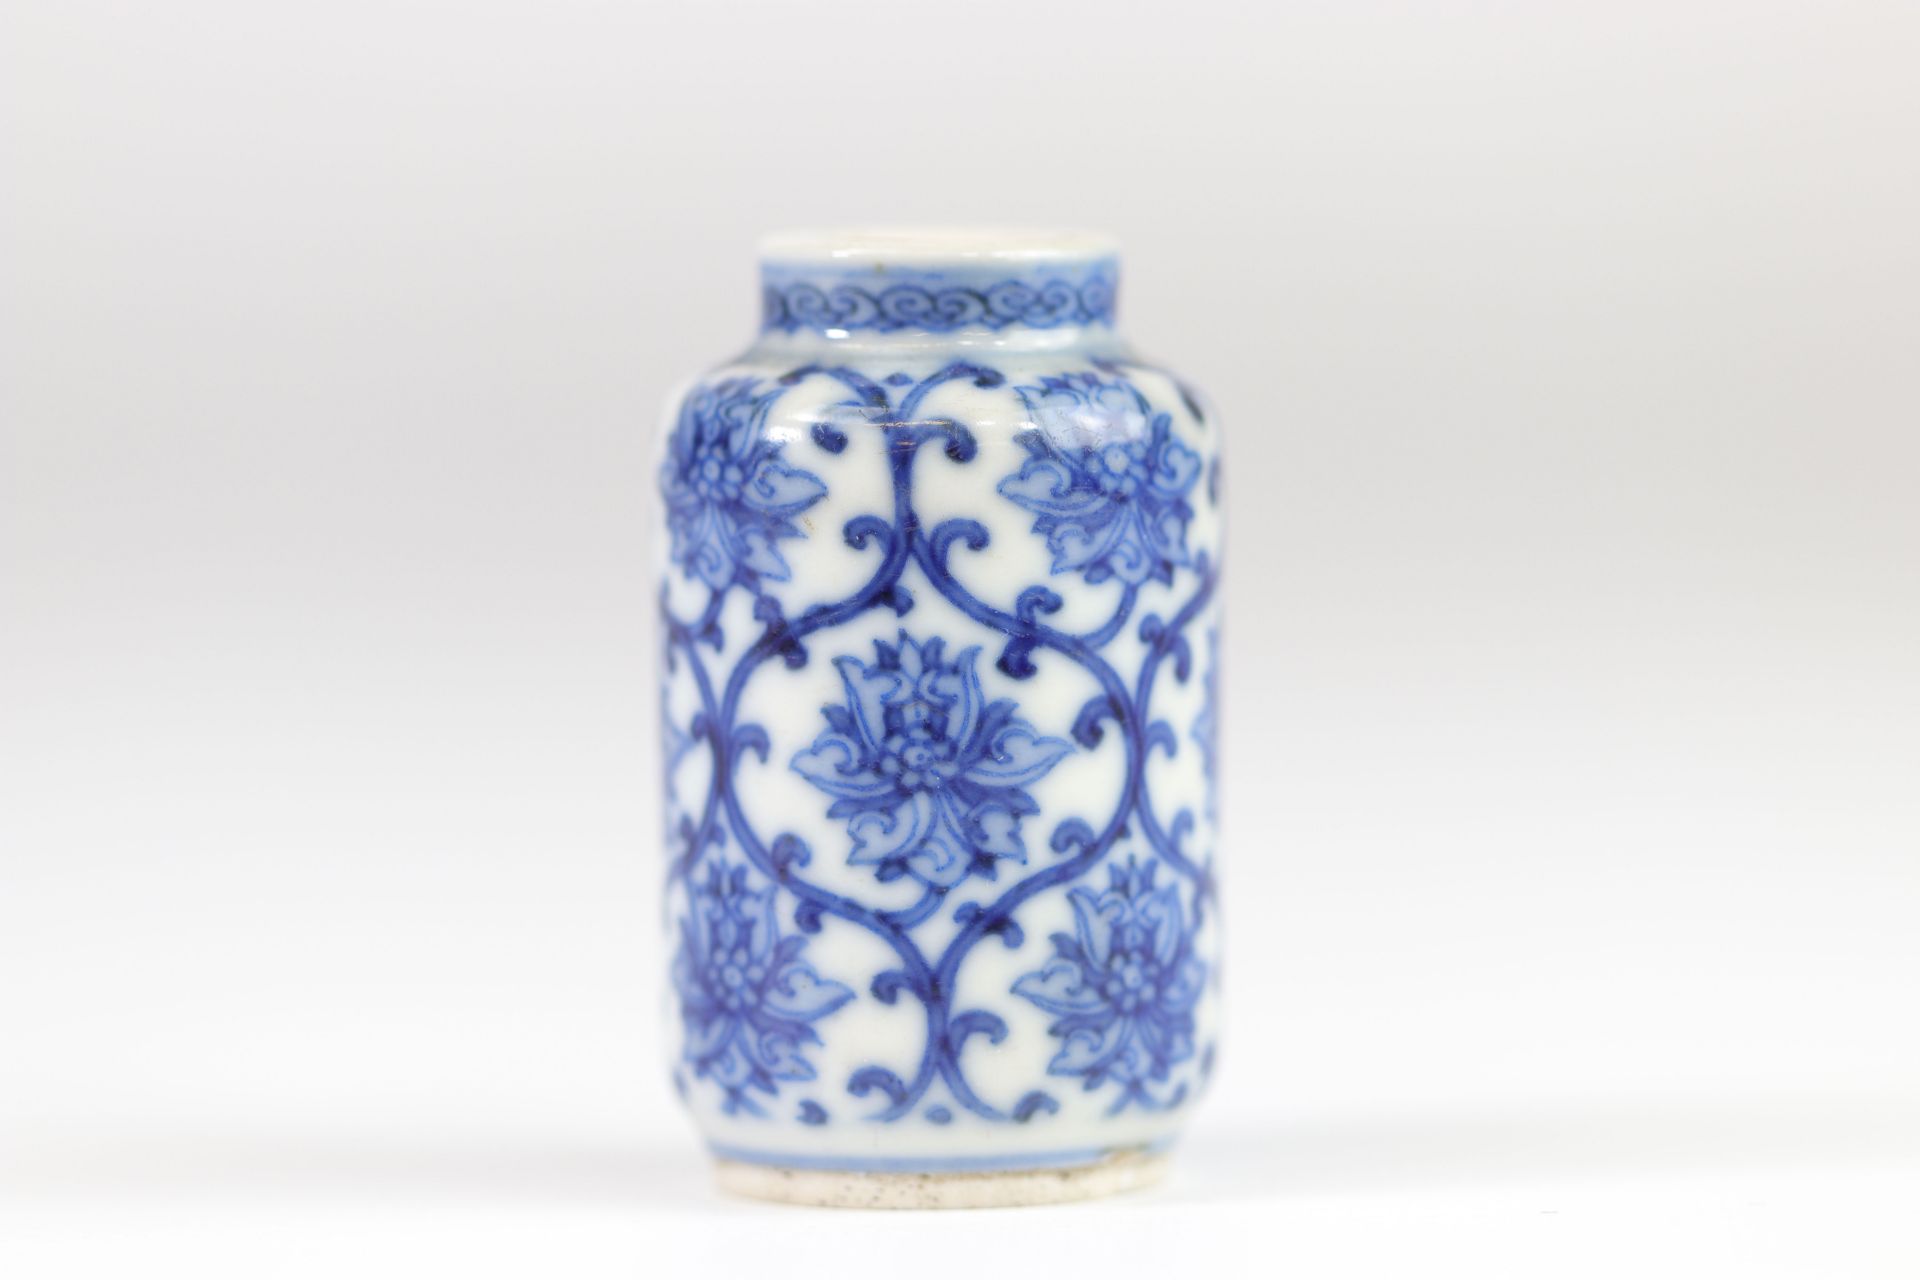 China blanc-bleu porcelain snuff box with floral decoration brand under the piece